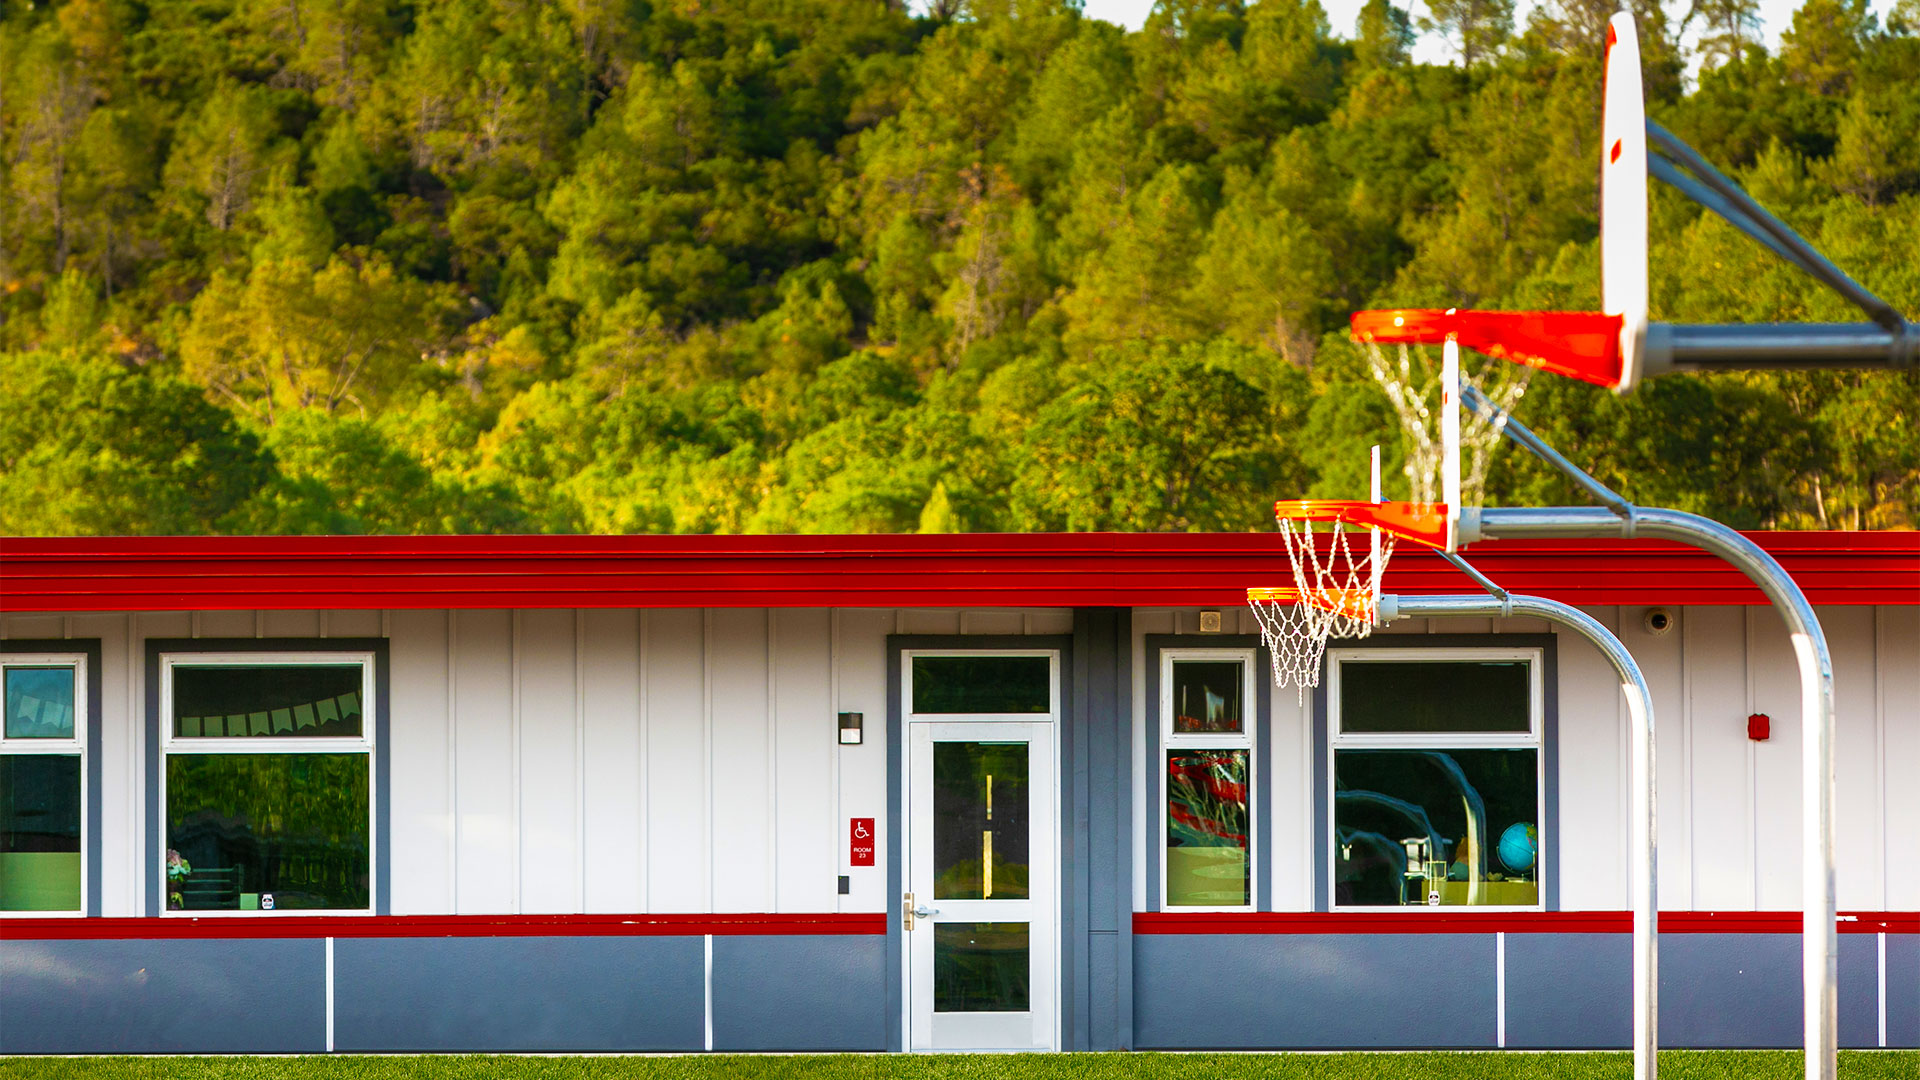 Portable classrooms with white panel walls, gray wainscot, and red trim. Basketball hoop in foreground and trees in back